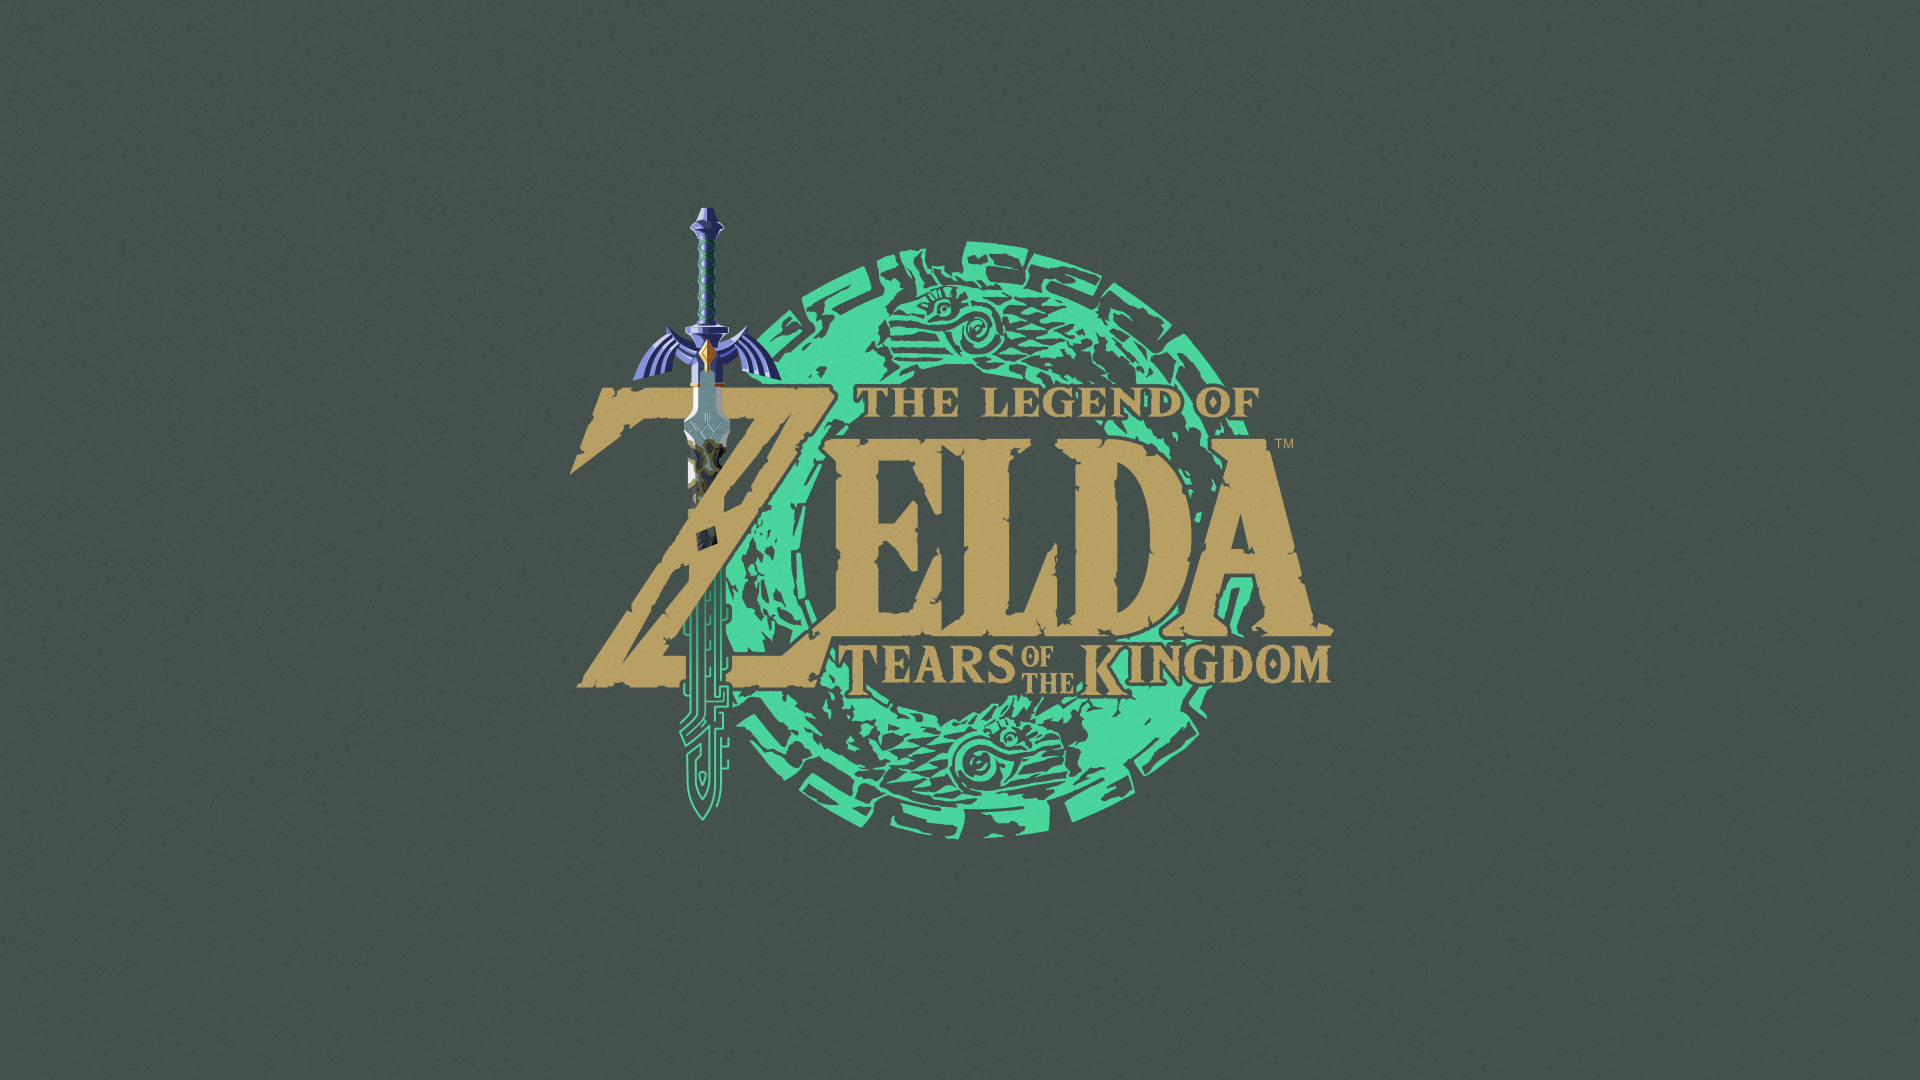 What to Expect from The Legend of Zelda: Tears of the Kingdom